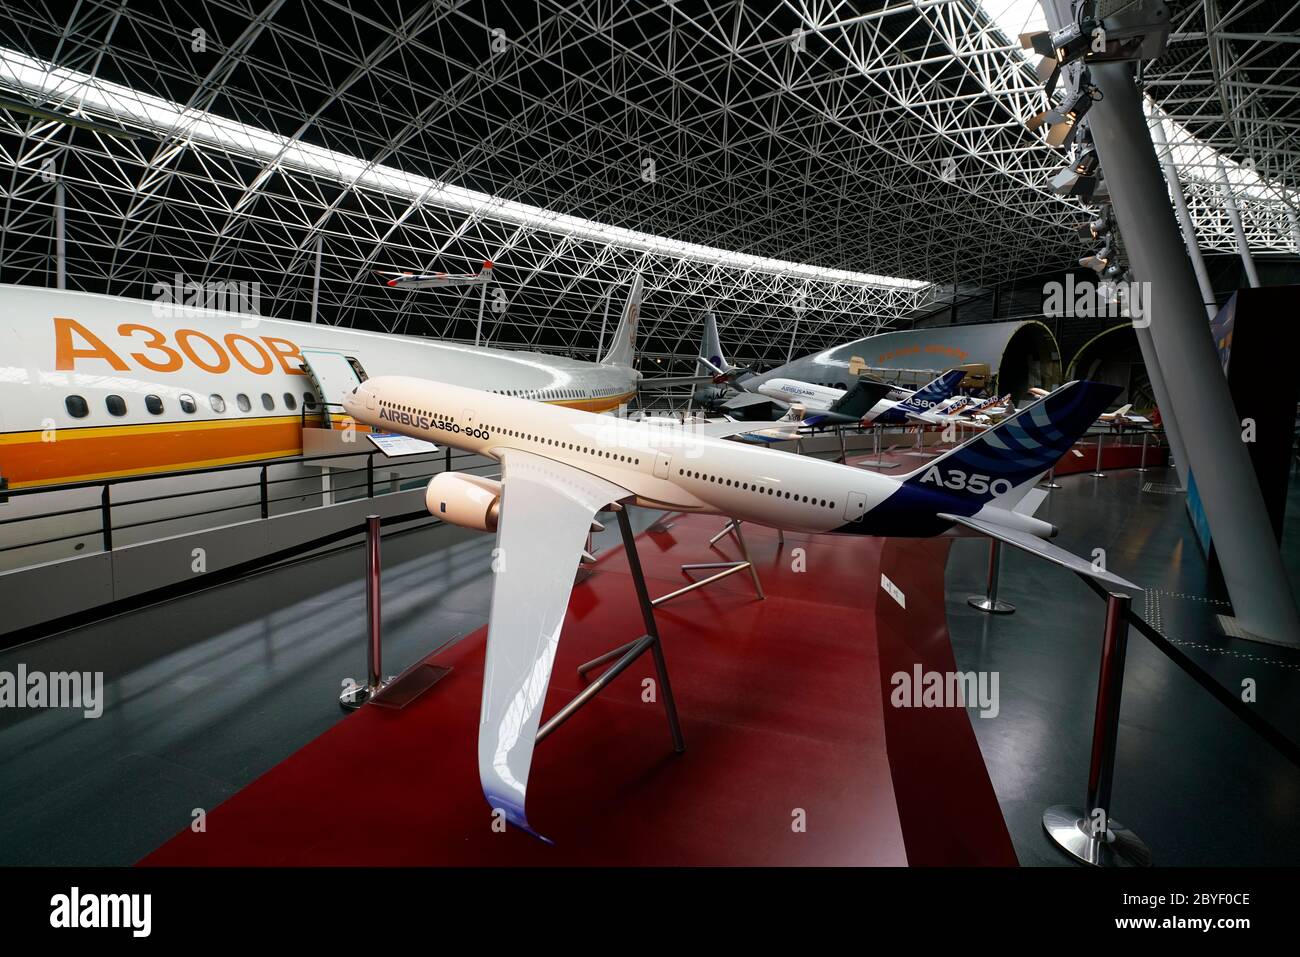 A model of Airbus A350 with an Airbus A300B wide-body airliner in background.Musee Aeroscopia Museum.Blagnac.Toulouse.Haute-Garonne.Occitanie.France Stock Photo